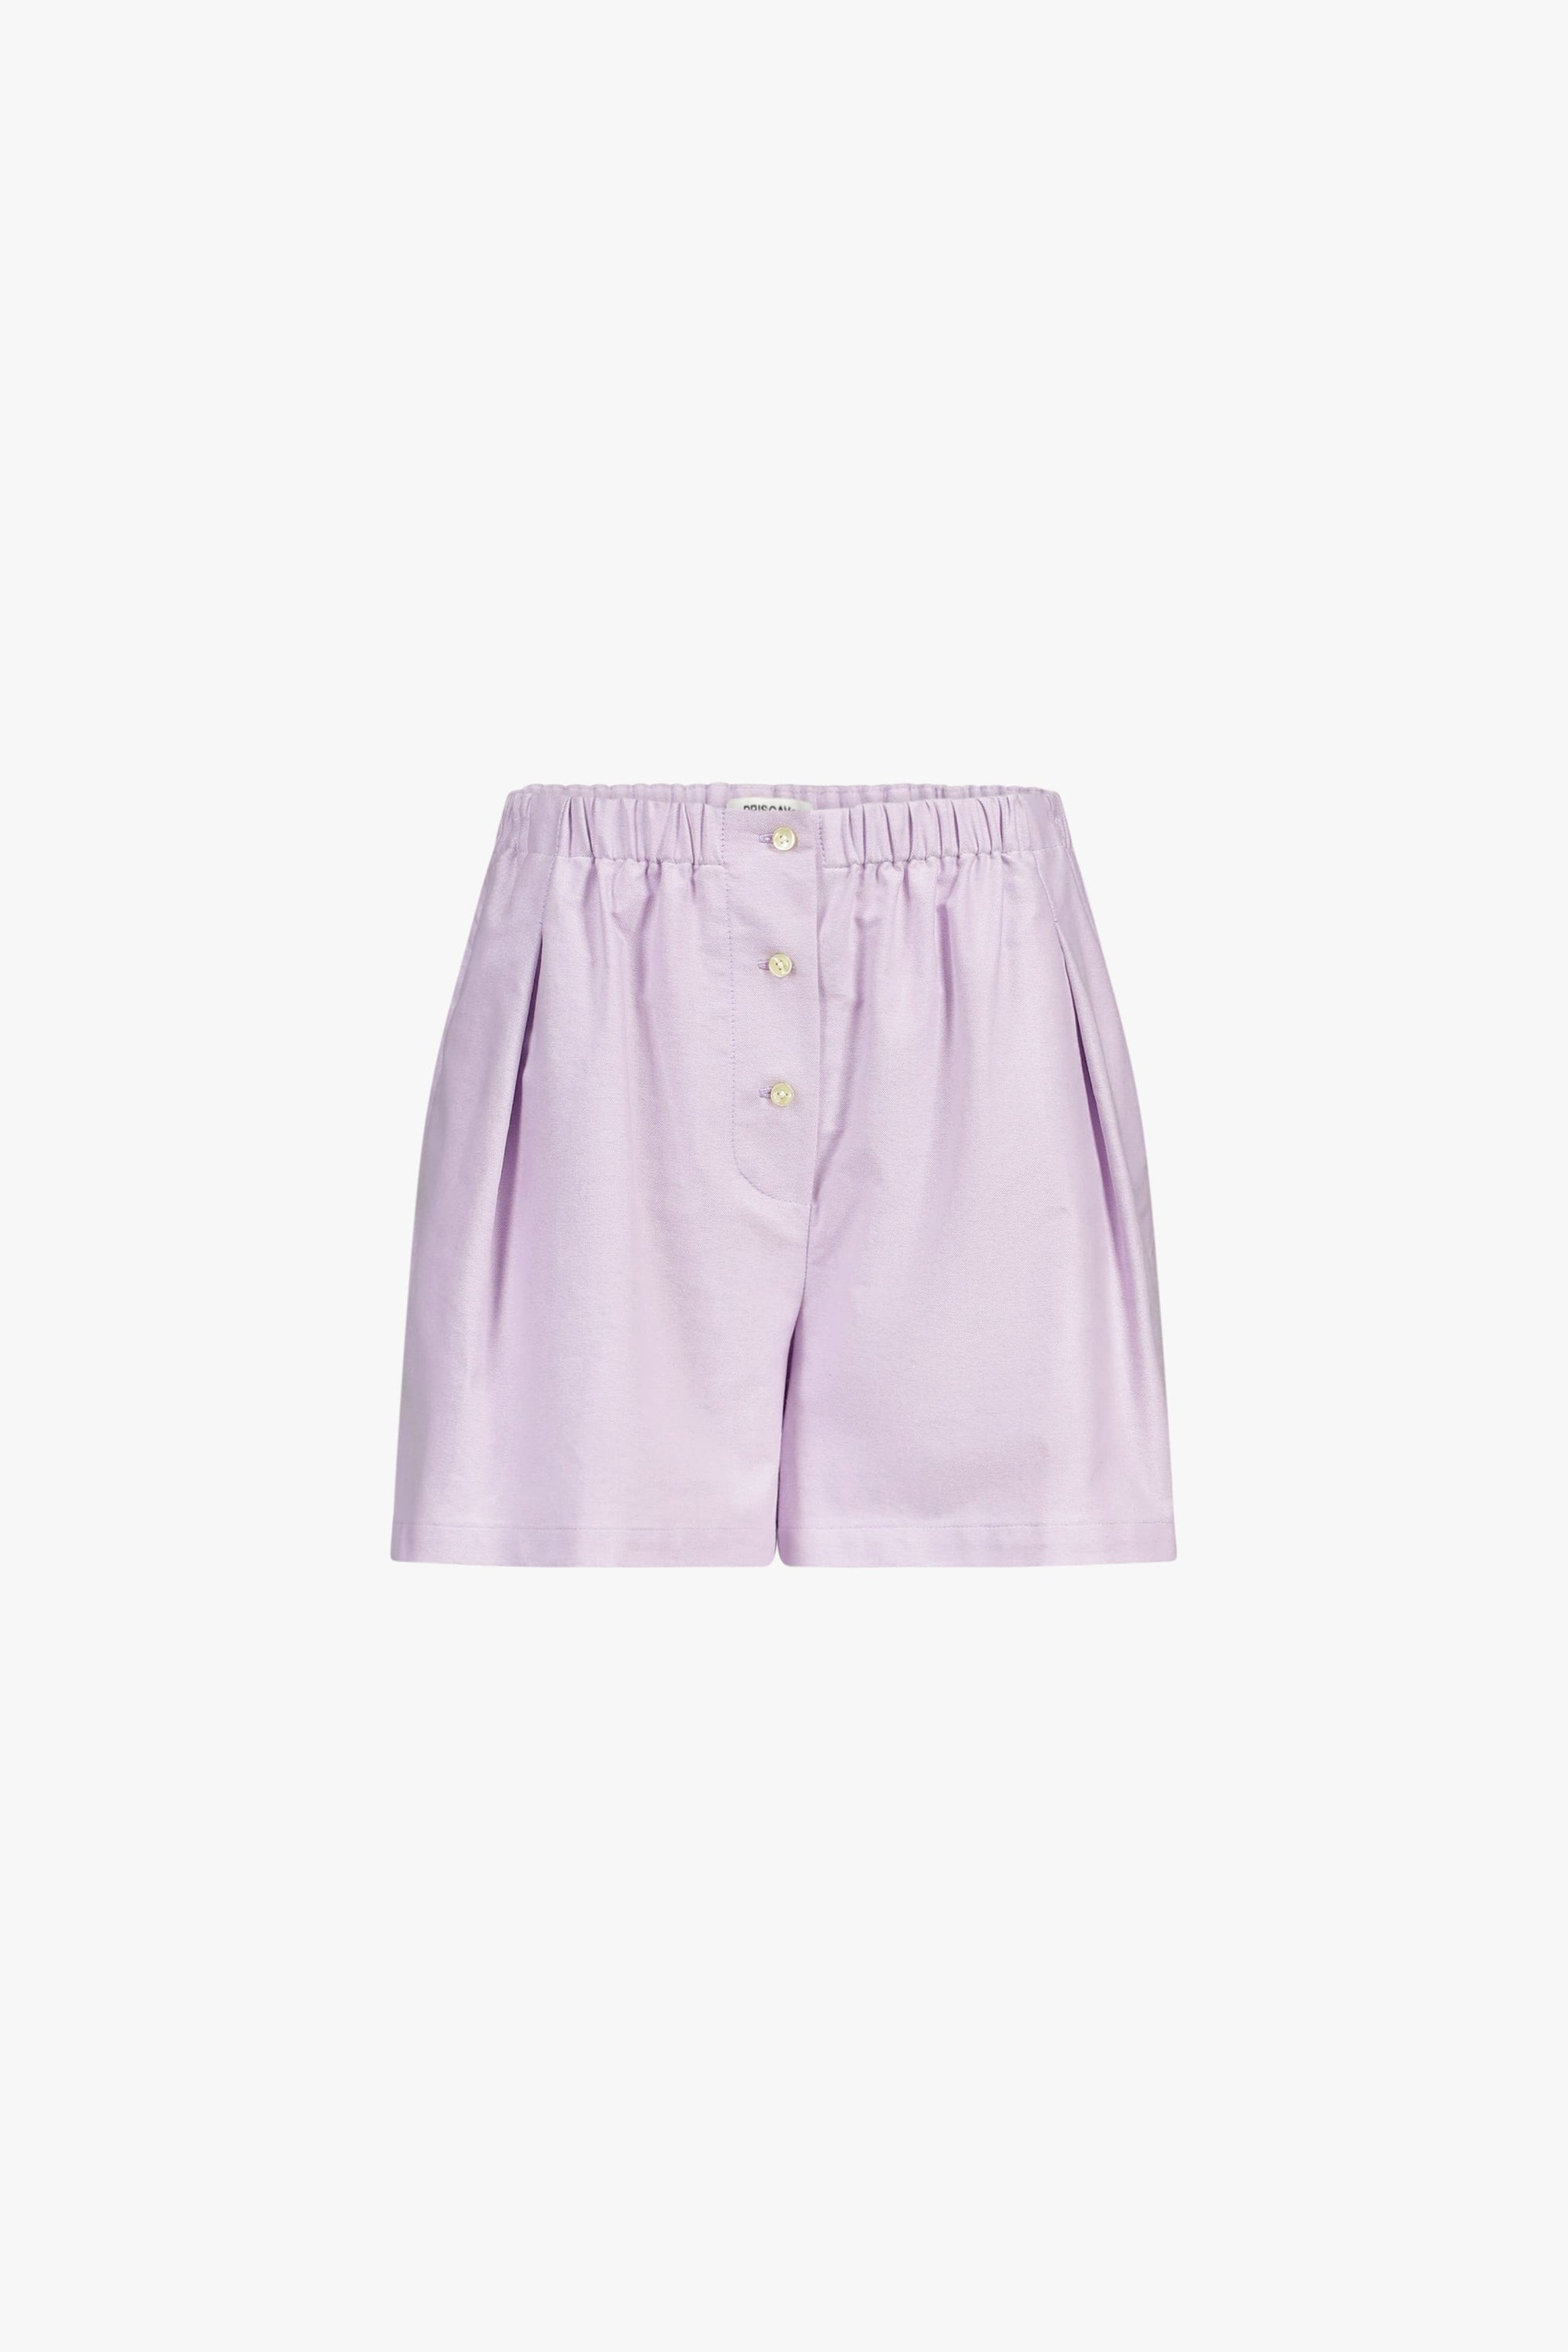 Oxford Boxer Shorts in Lilac